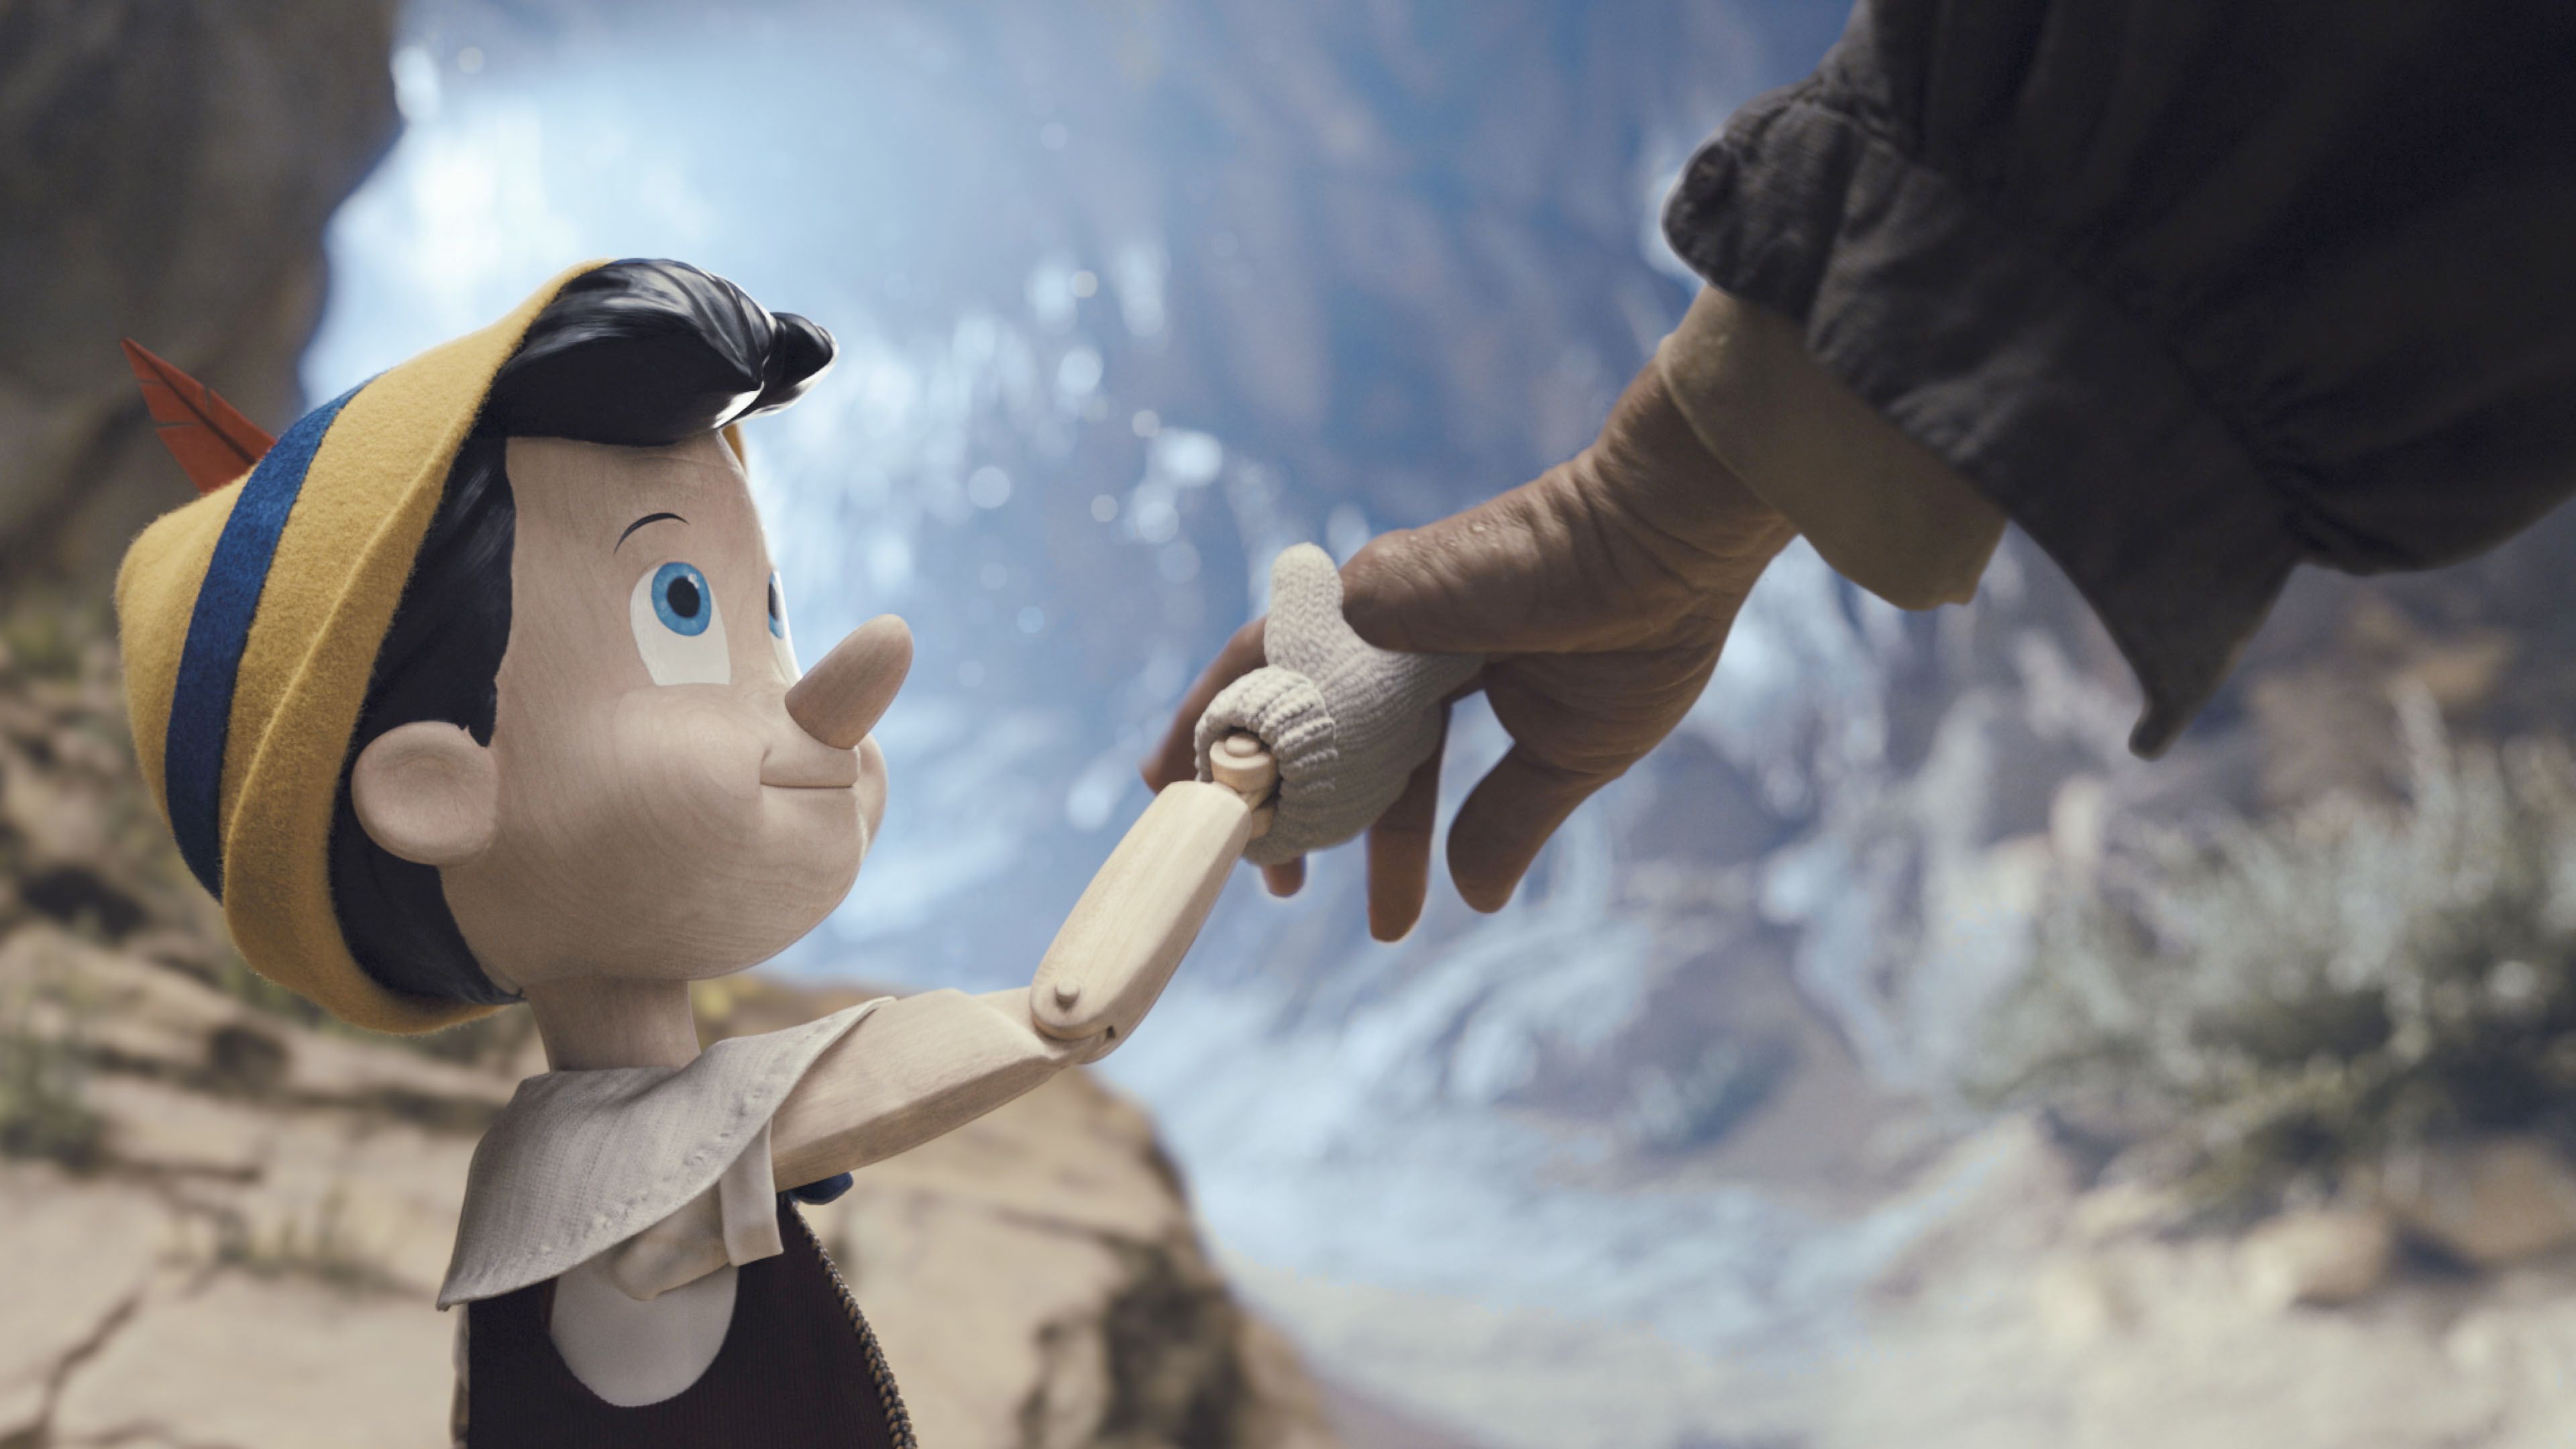 Pinocchio review - is Disney's live-action remake any good?